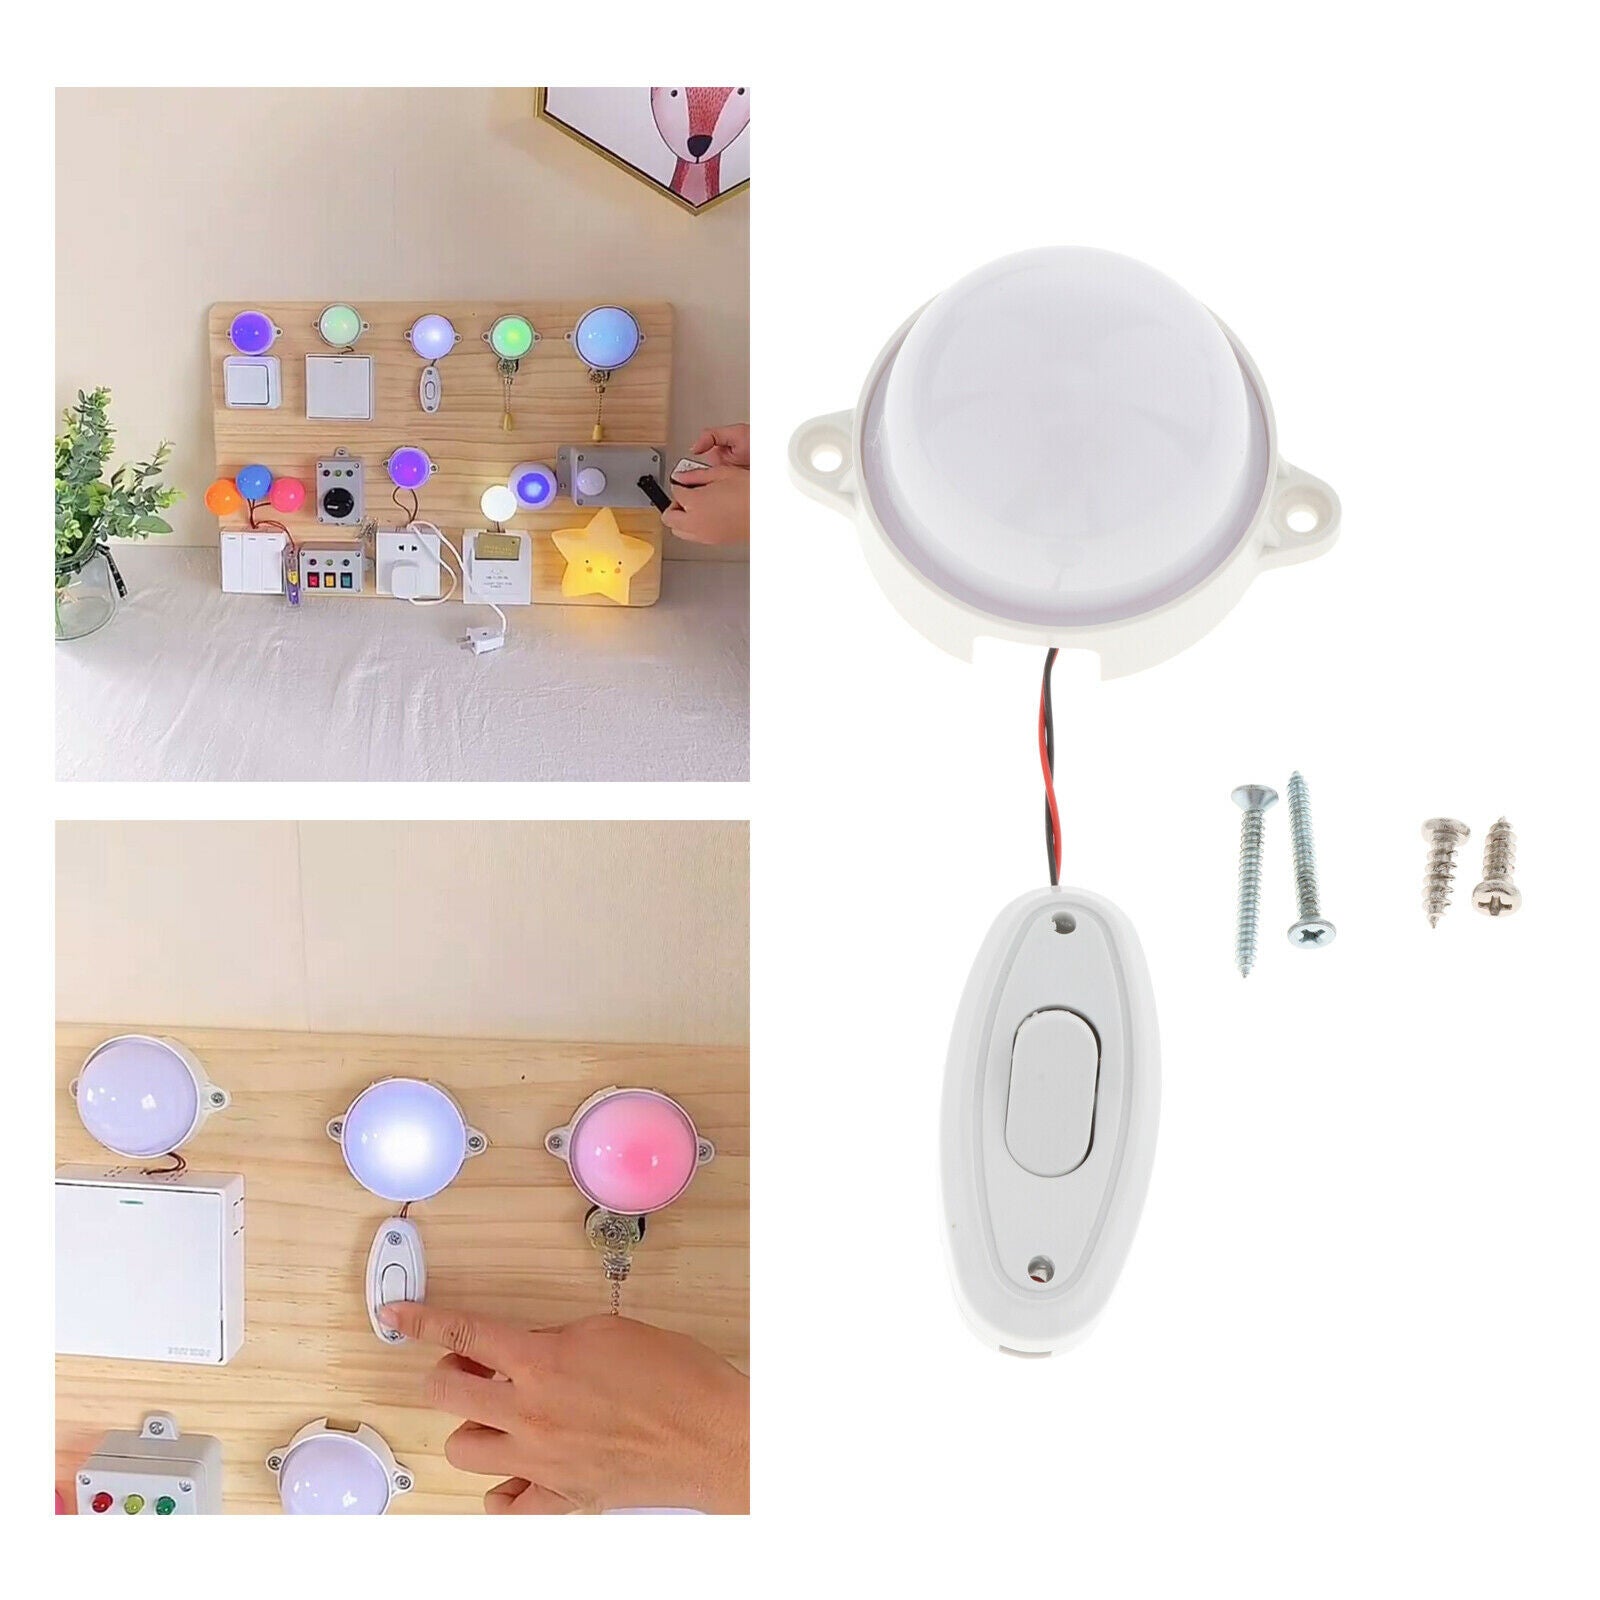 LED Light Busy Board Life Skill Educational Toys For Children From 3 Years A